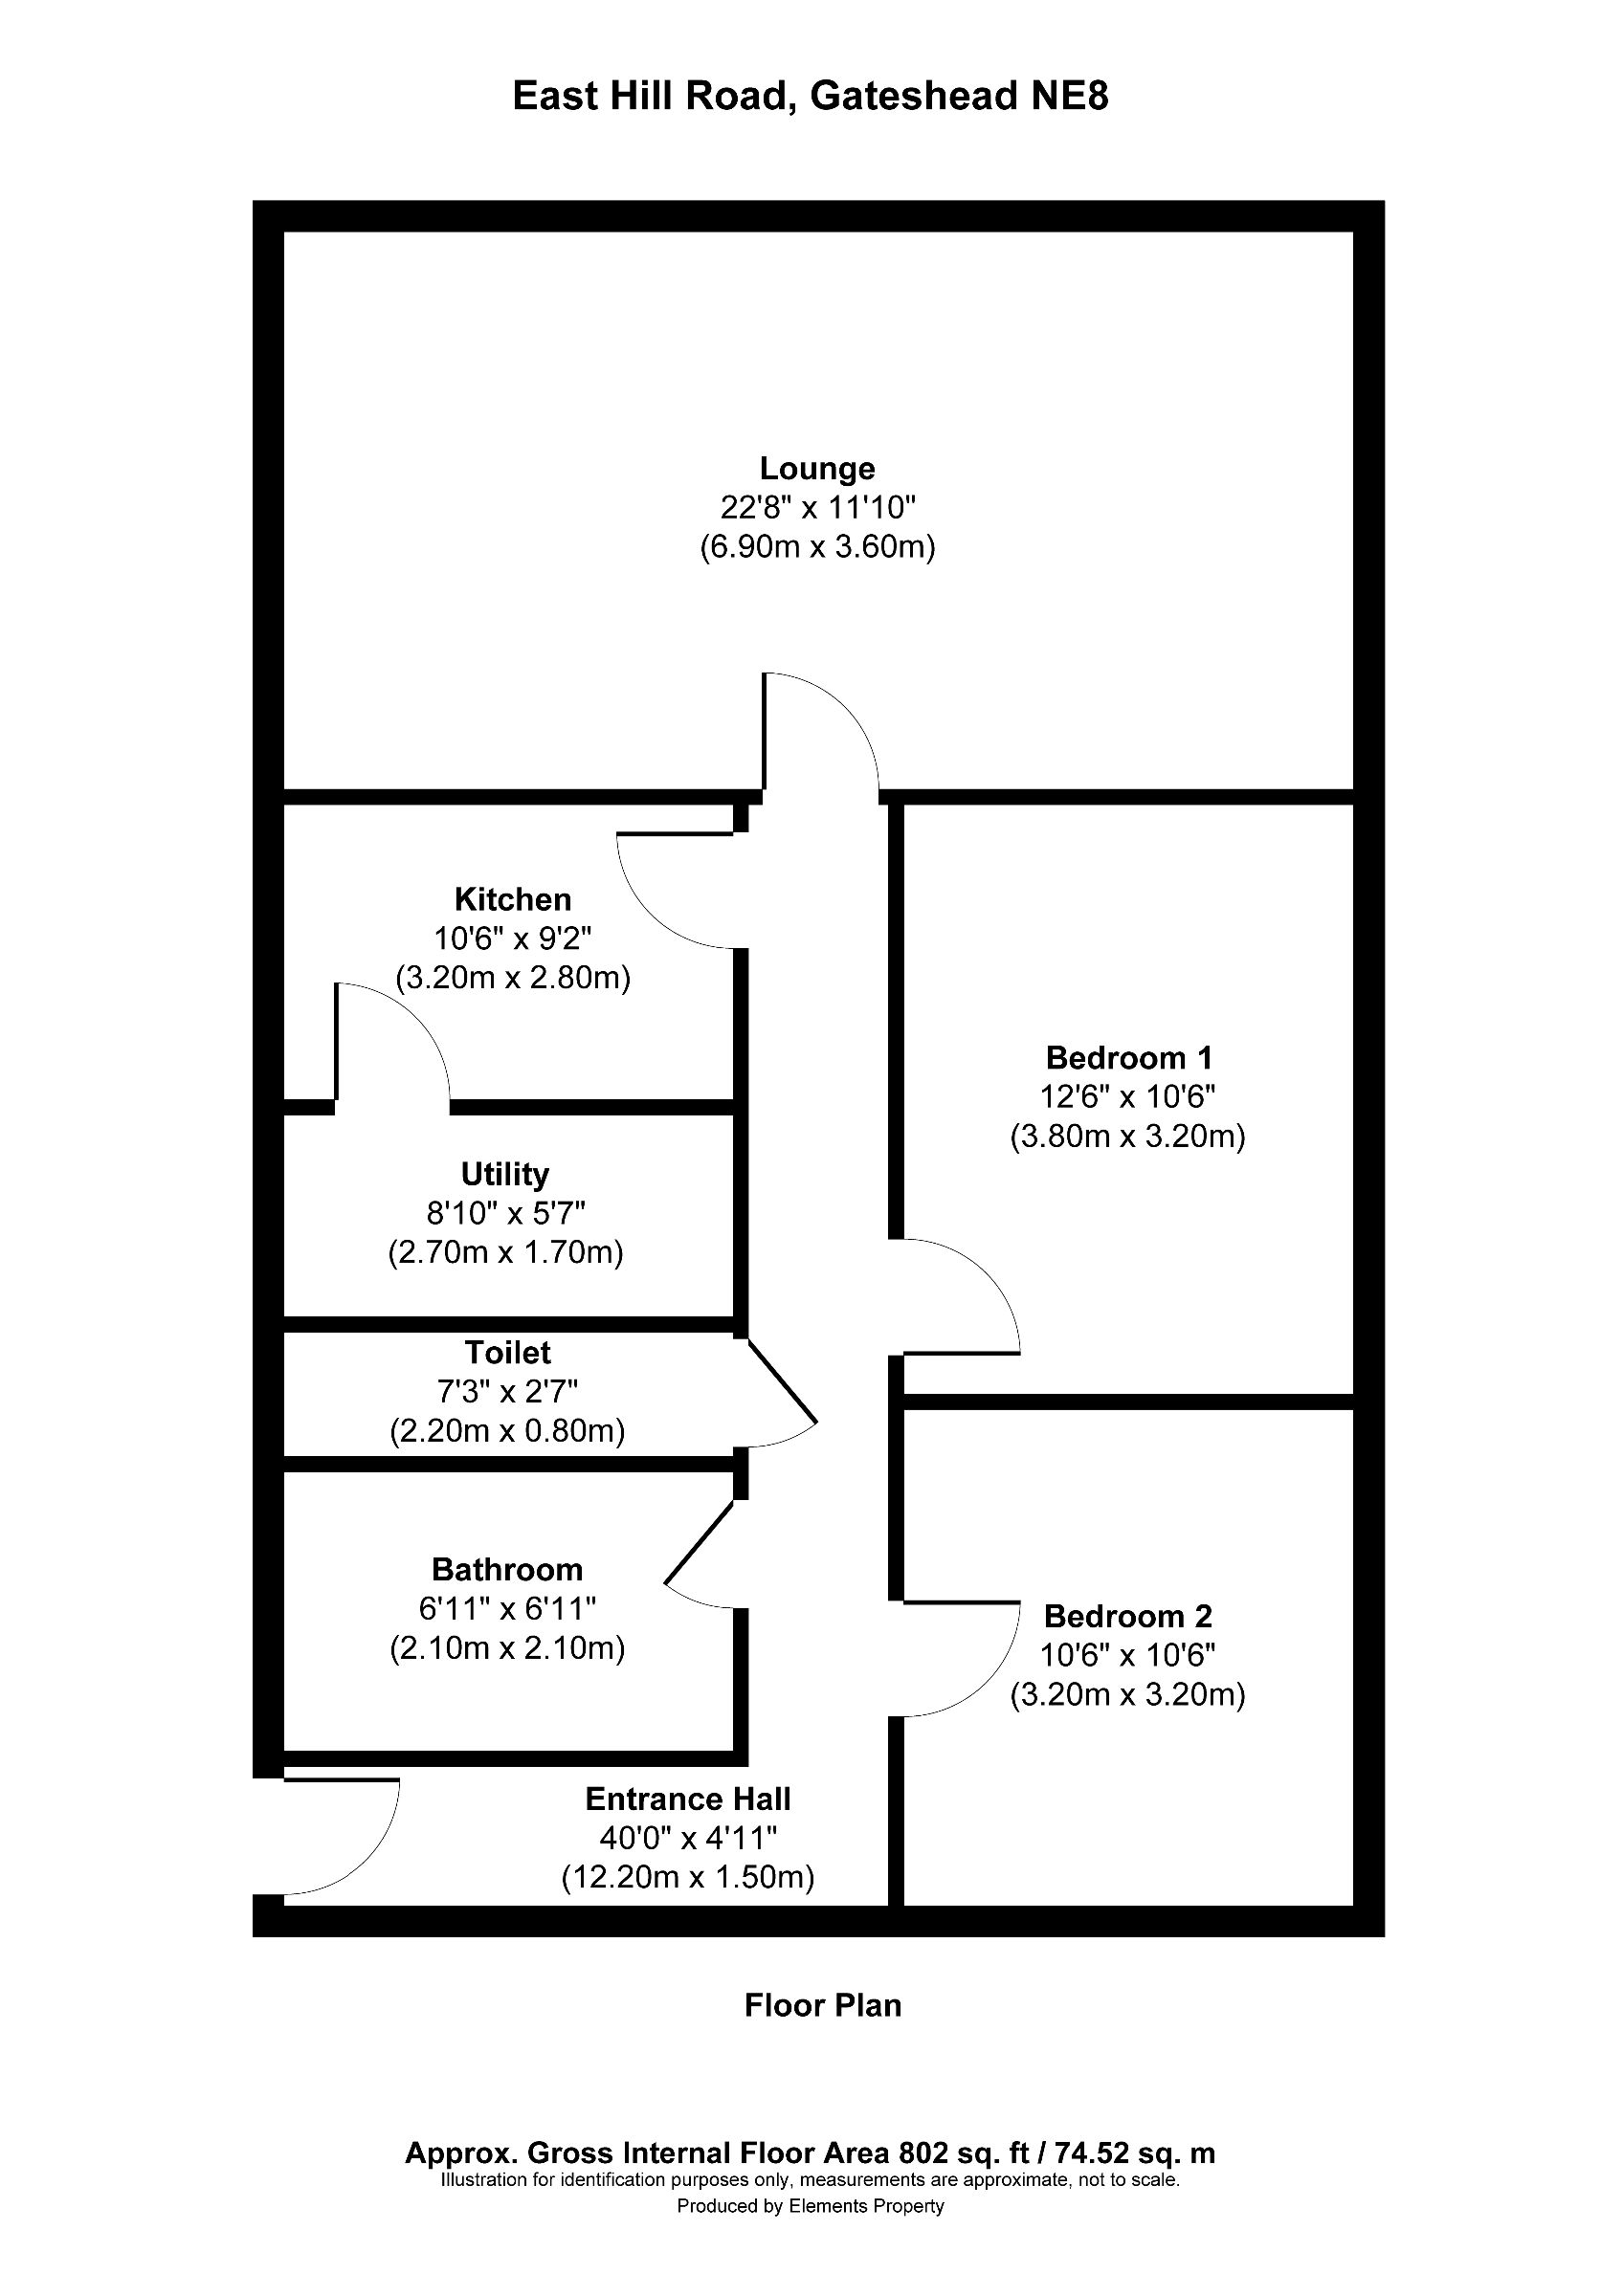 2 bed flat for sale in East Hill Road, Gateshead - Property floorplan